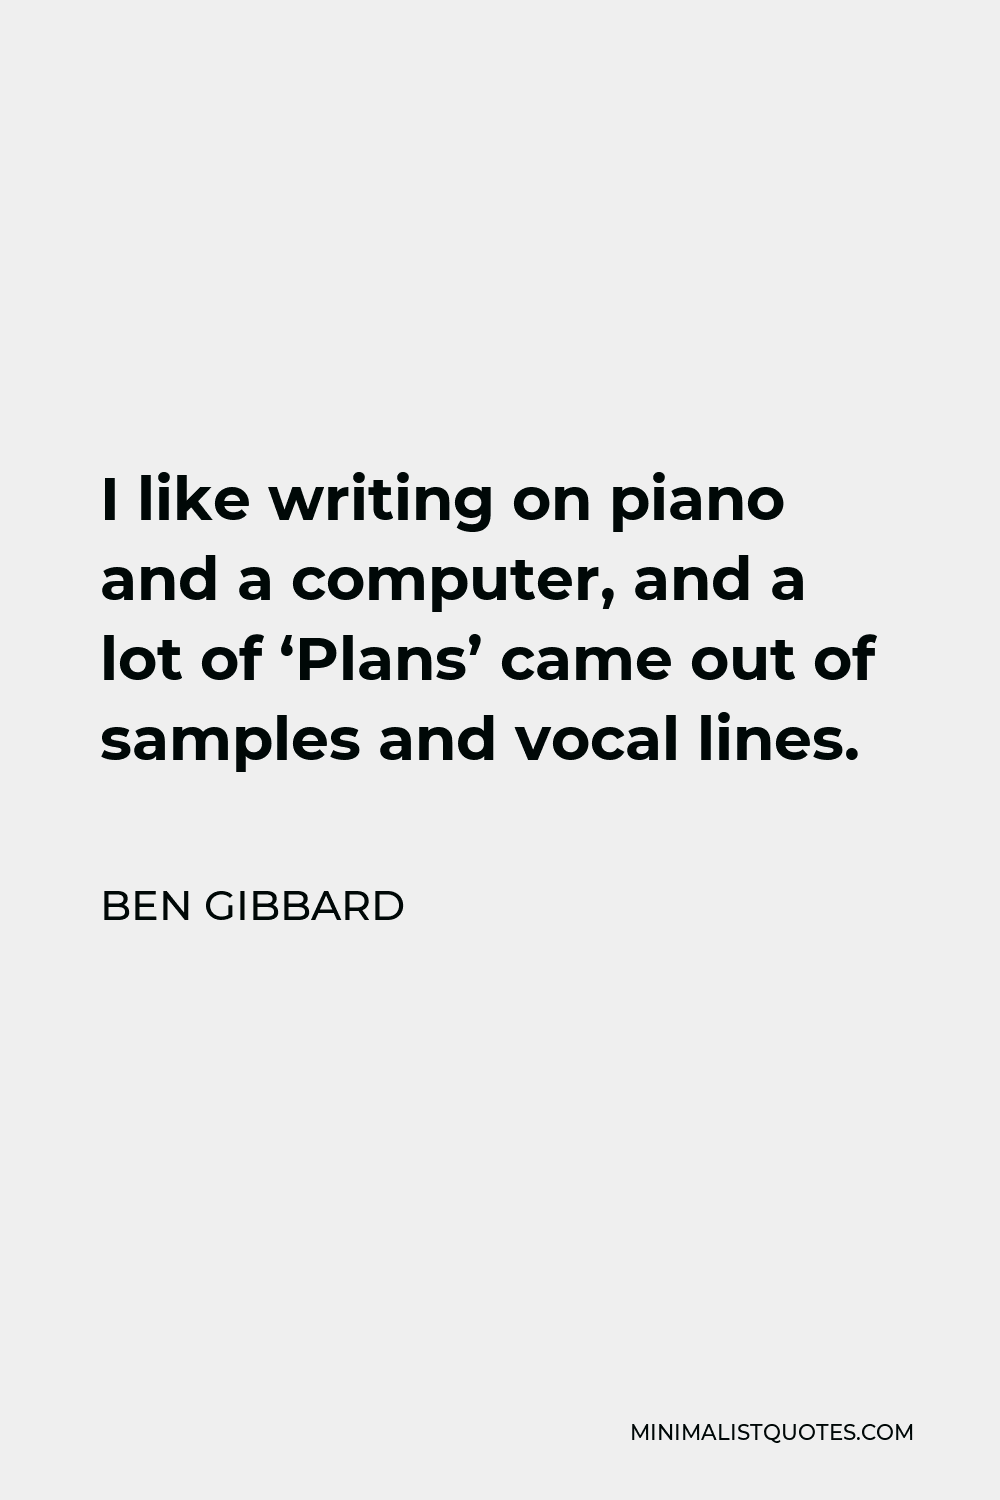 Ben Gibbard Quote - I like writing on piano and a computer, and a lot of ‘Plans’ came out of samples and vocal lines.